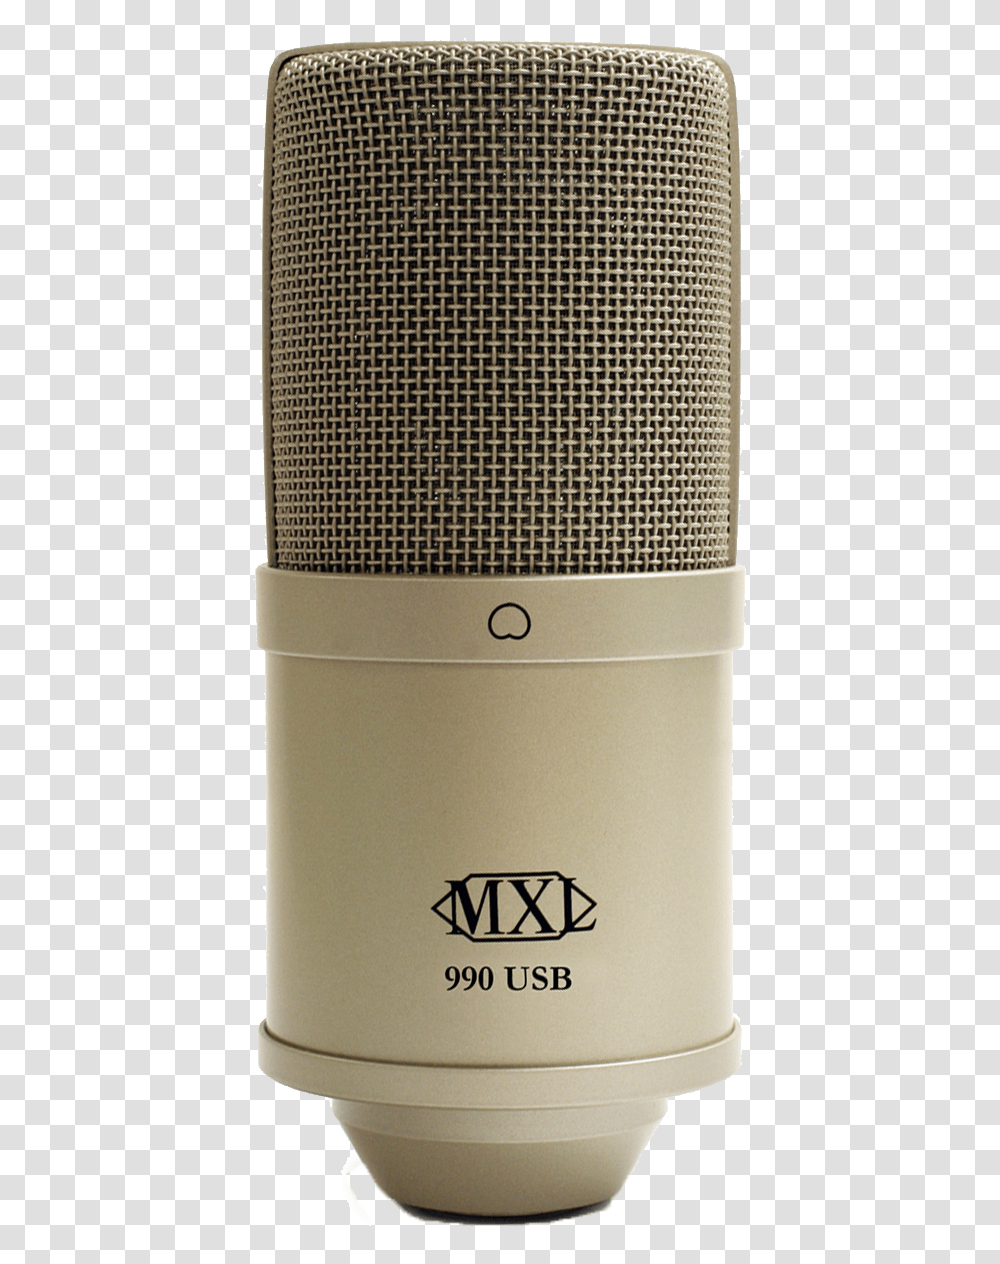 Mxl 990 Usb Mxl 990 Mic, Electrical Device, Microphone, Mobile Phone, Electronics Transparent Png